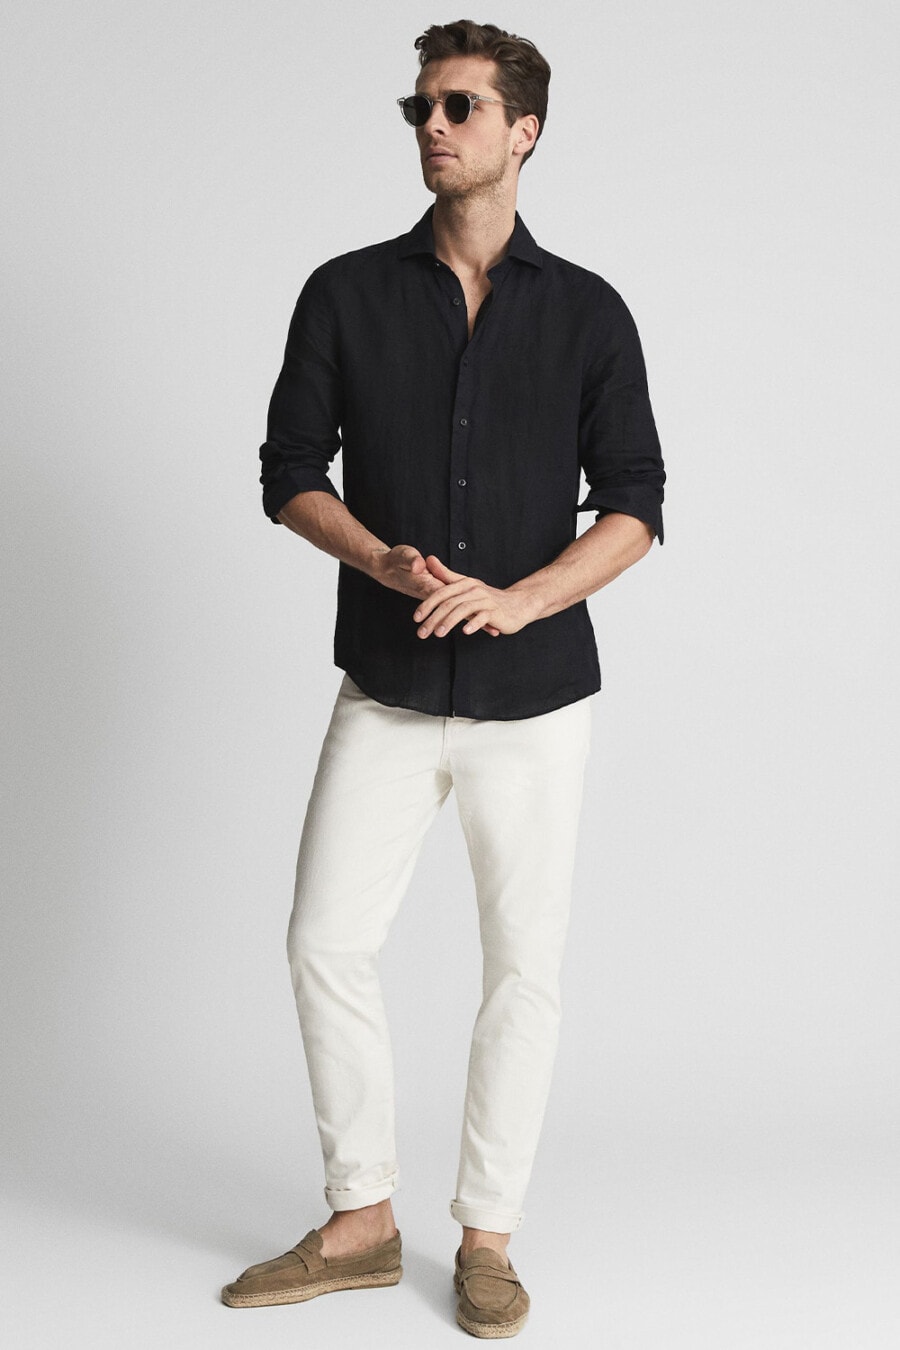 Men's white jeans, black shirt, light brown suede espadrilles and clear frame sunglasses outfit